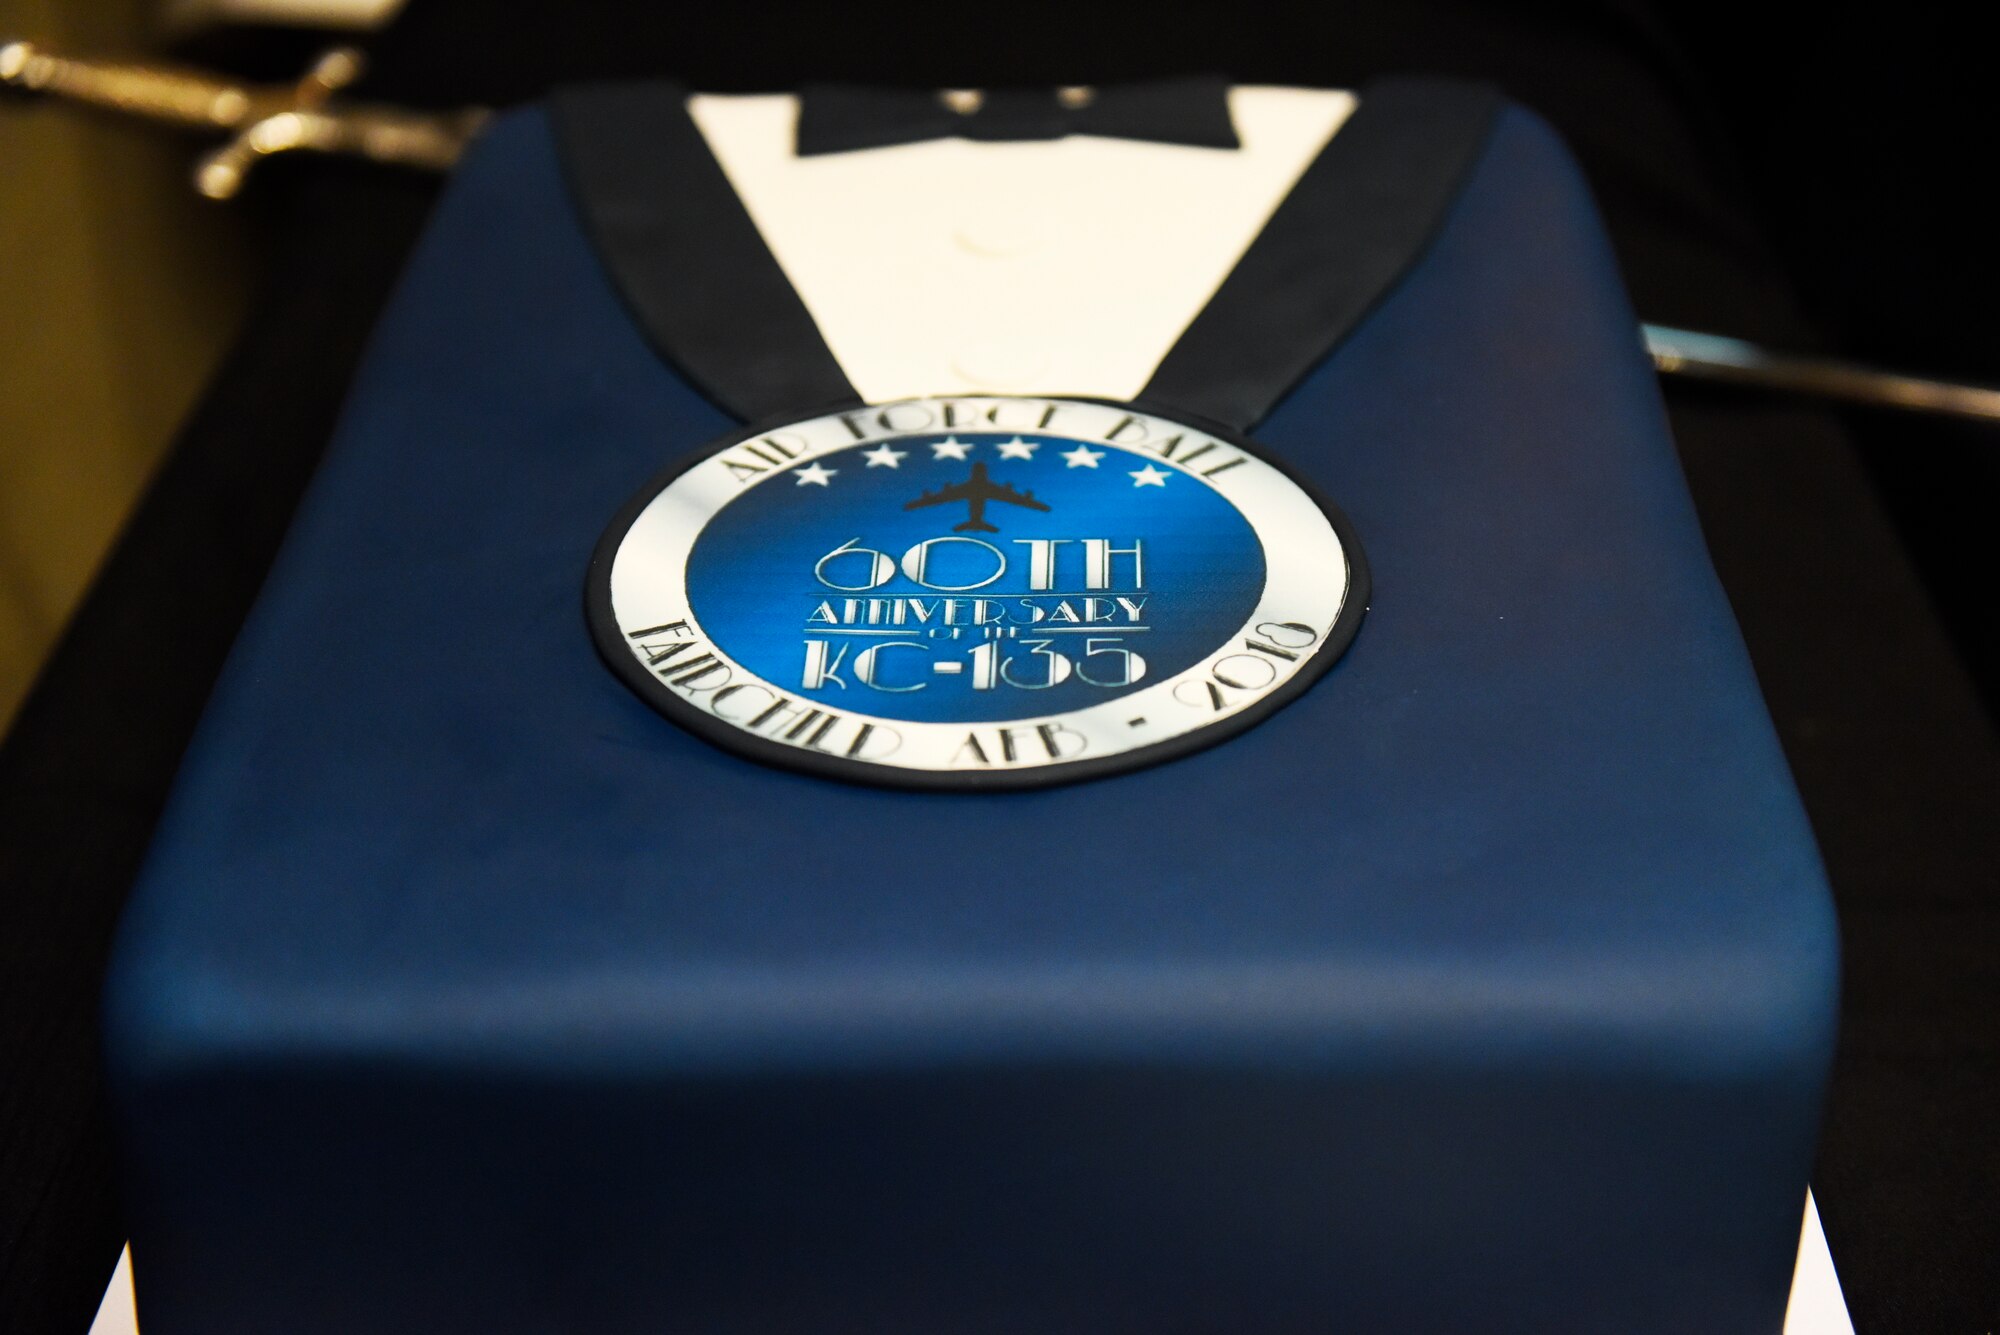 A cake reflecting the KC-135's 60th anniversary waits for the ceremonial cake cutting at Fairchild's Air Force Ball at Northern Quest Resort and Casino in Airway Heights, Washington, Sept. 15, 2018. Ceremonial cake cutting is a tradition where the youngest Airman cuts the cake and serves a piece to the oldest Airman in attendance. (U.S. Air Force photo/Airman 1st Class Lawrence Sena)